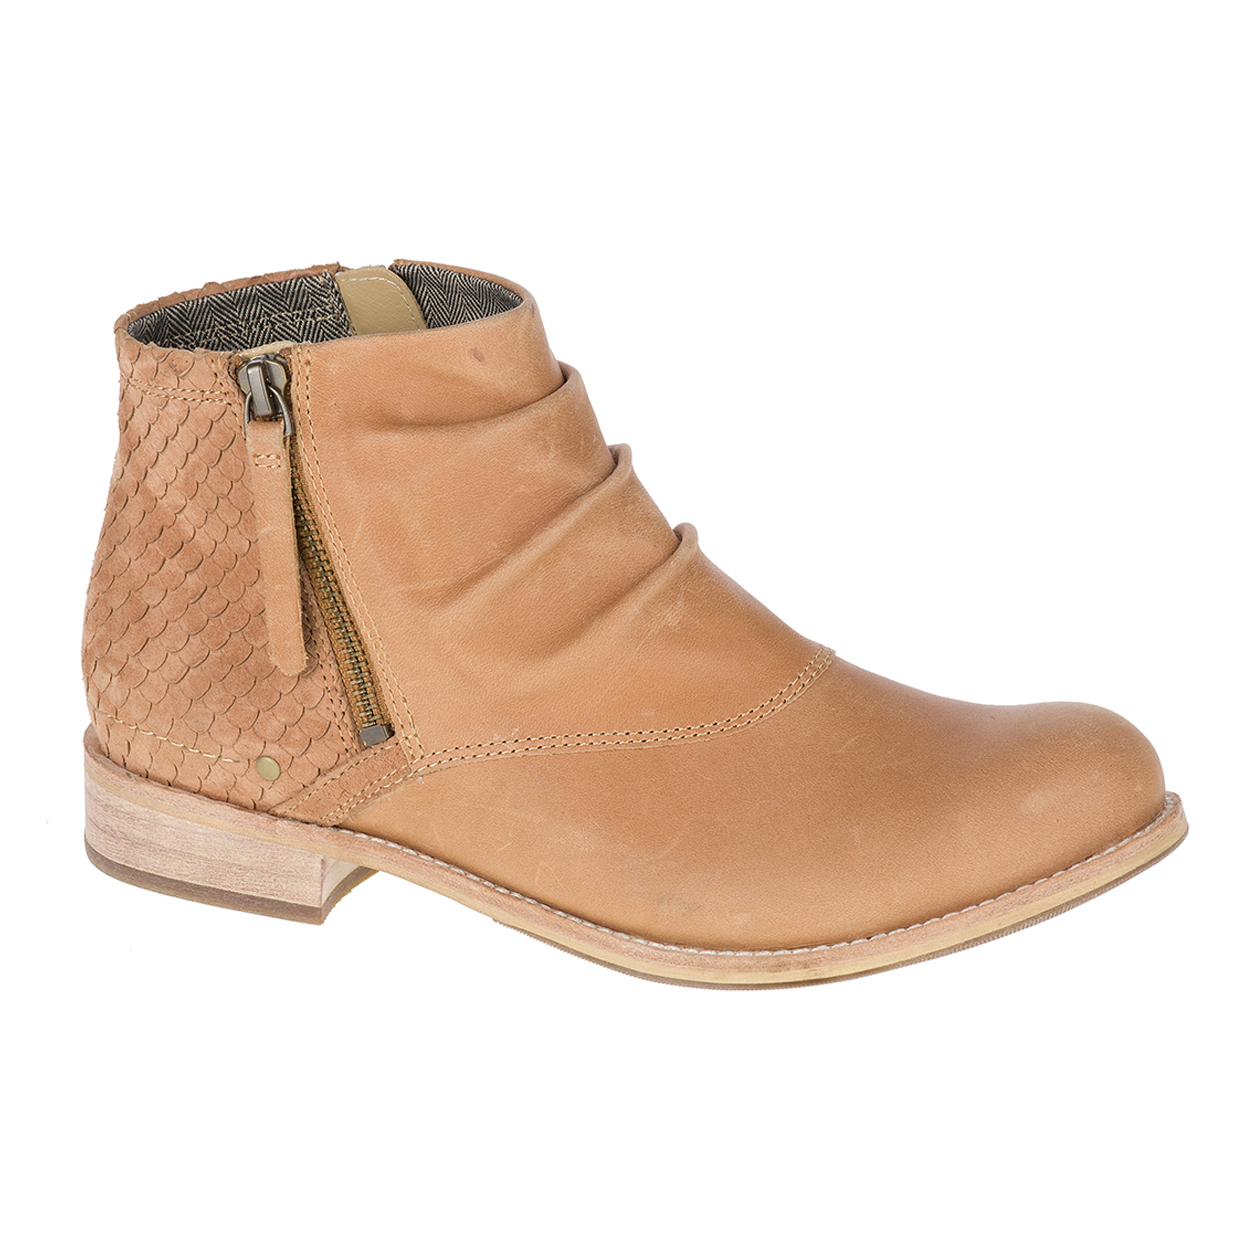 Cat Footwear South Africa IRENEA Womens Leather Boots